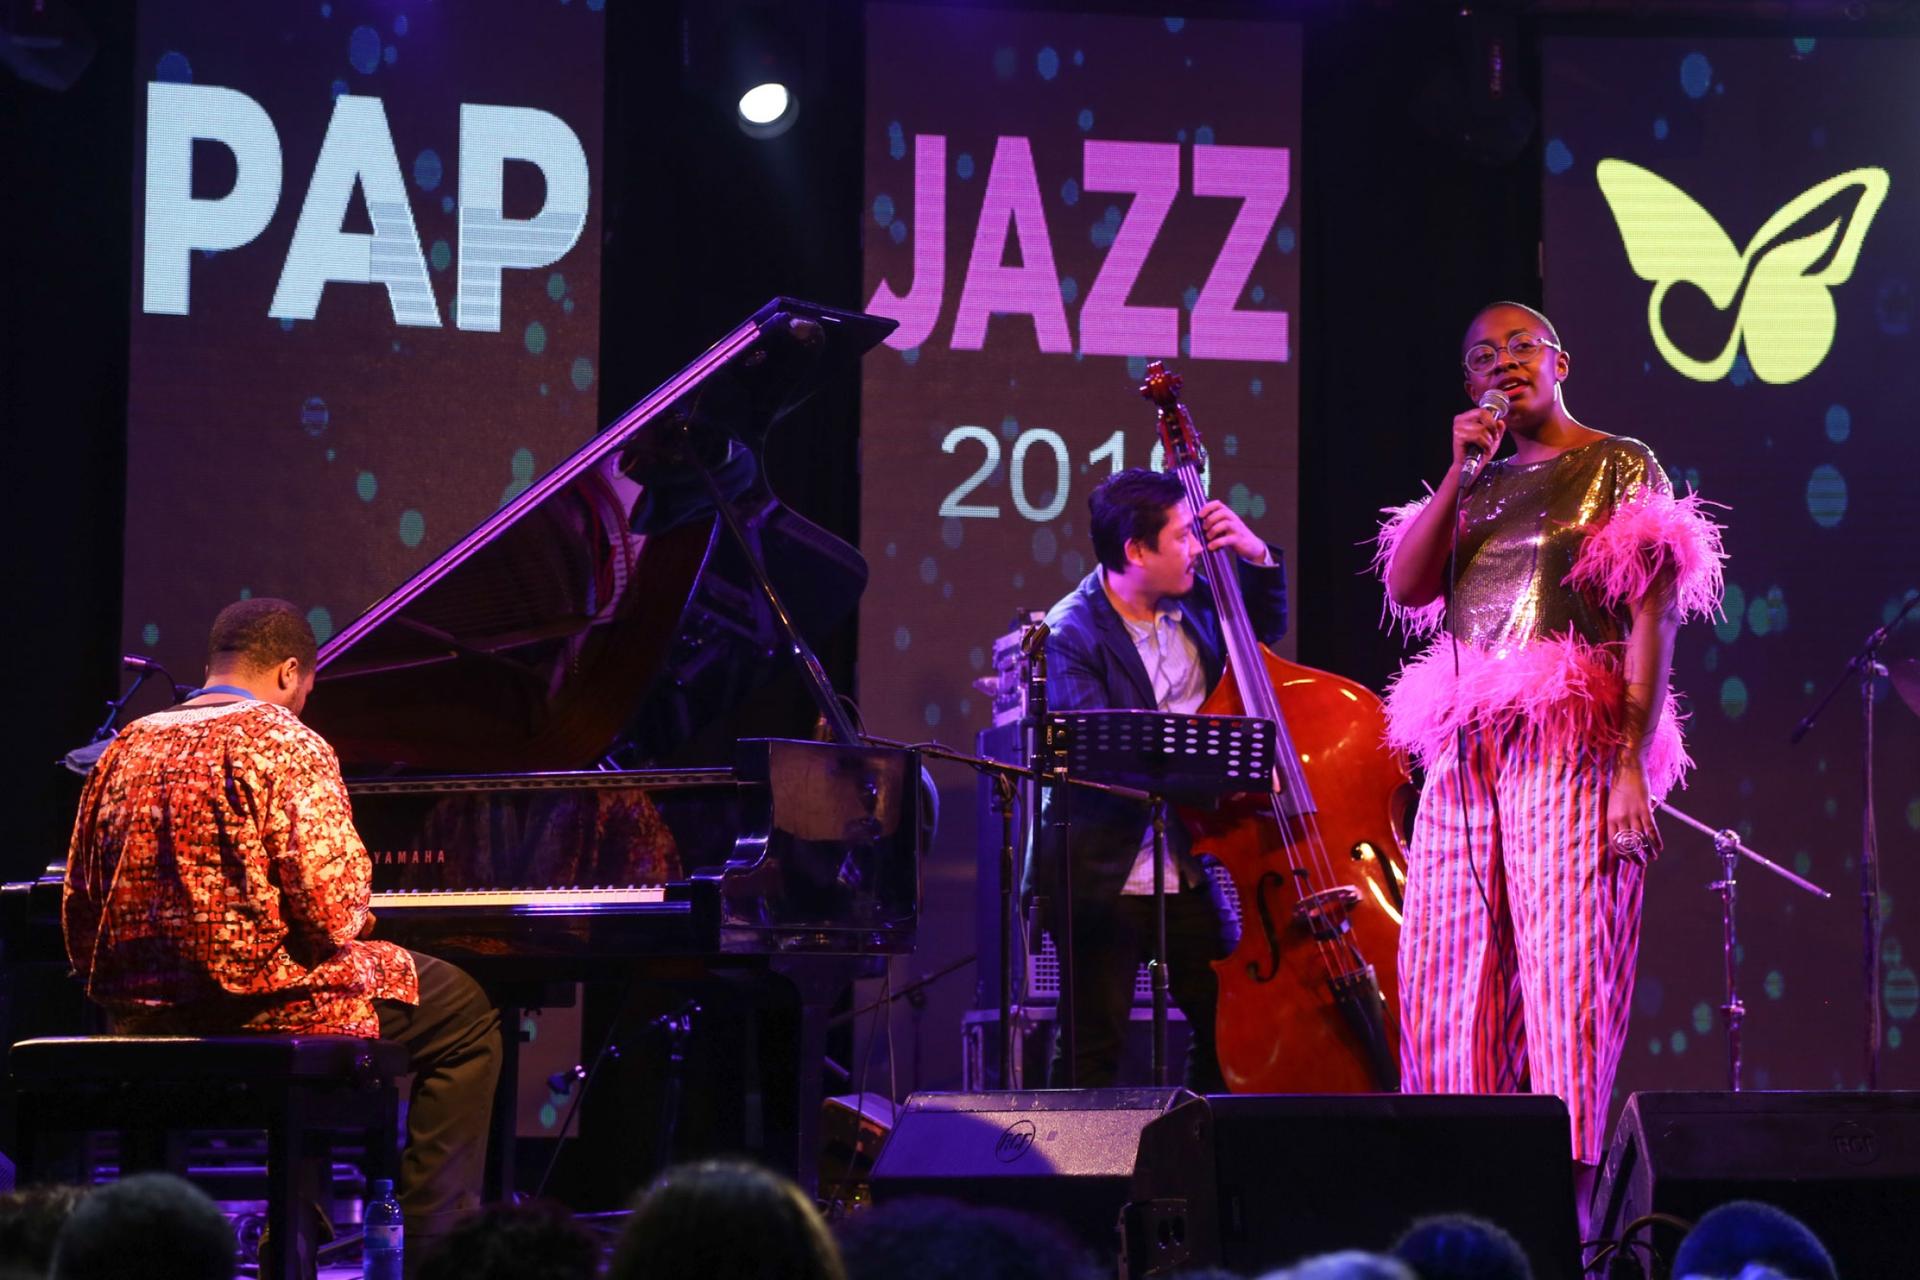 Grammy award winner Cécile Mc Lorin Salvant, Haitian French American, sings at the PapJazz Festival in Haiti. 